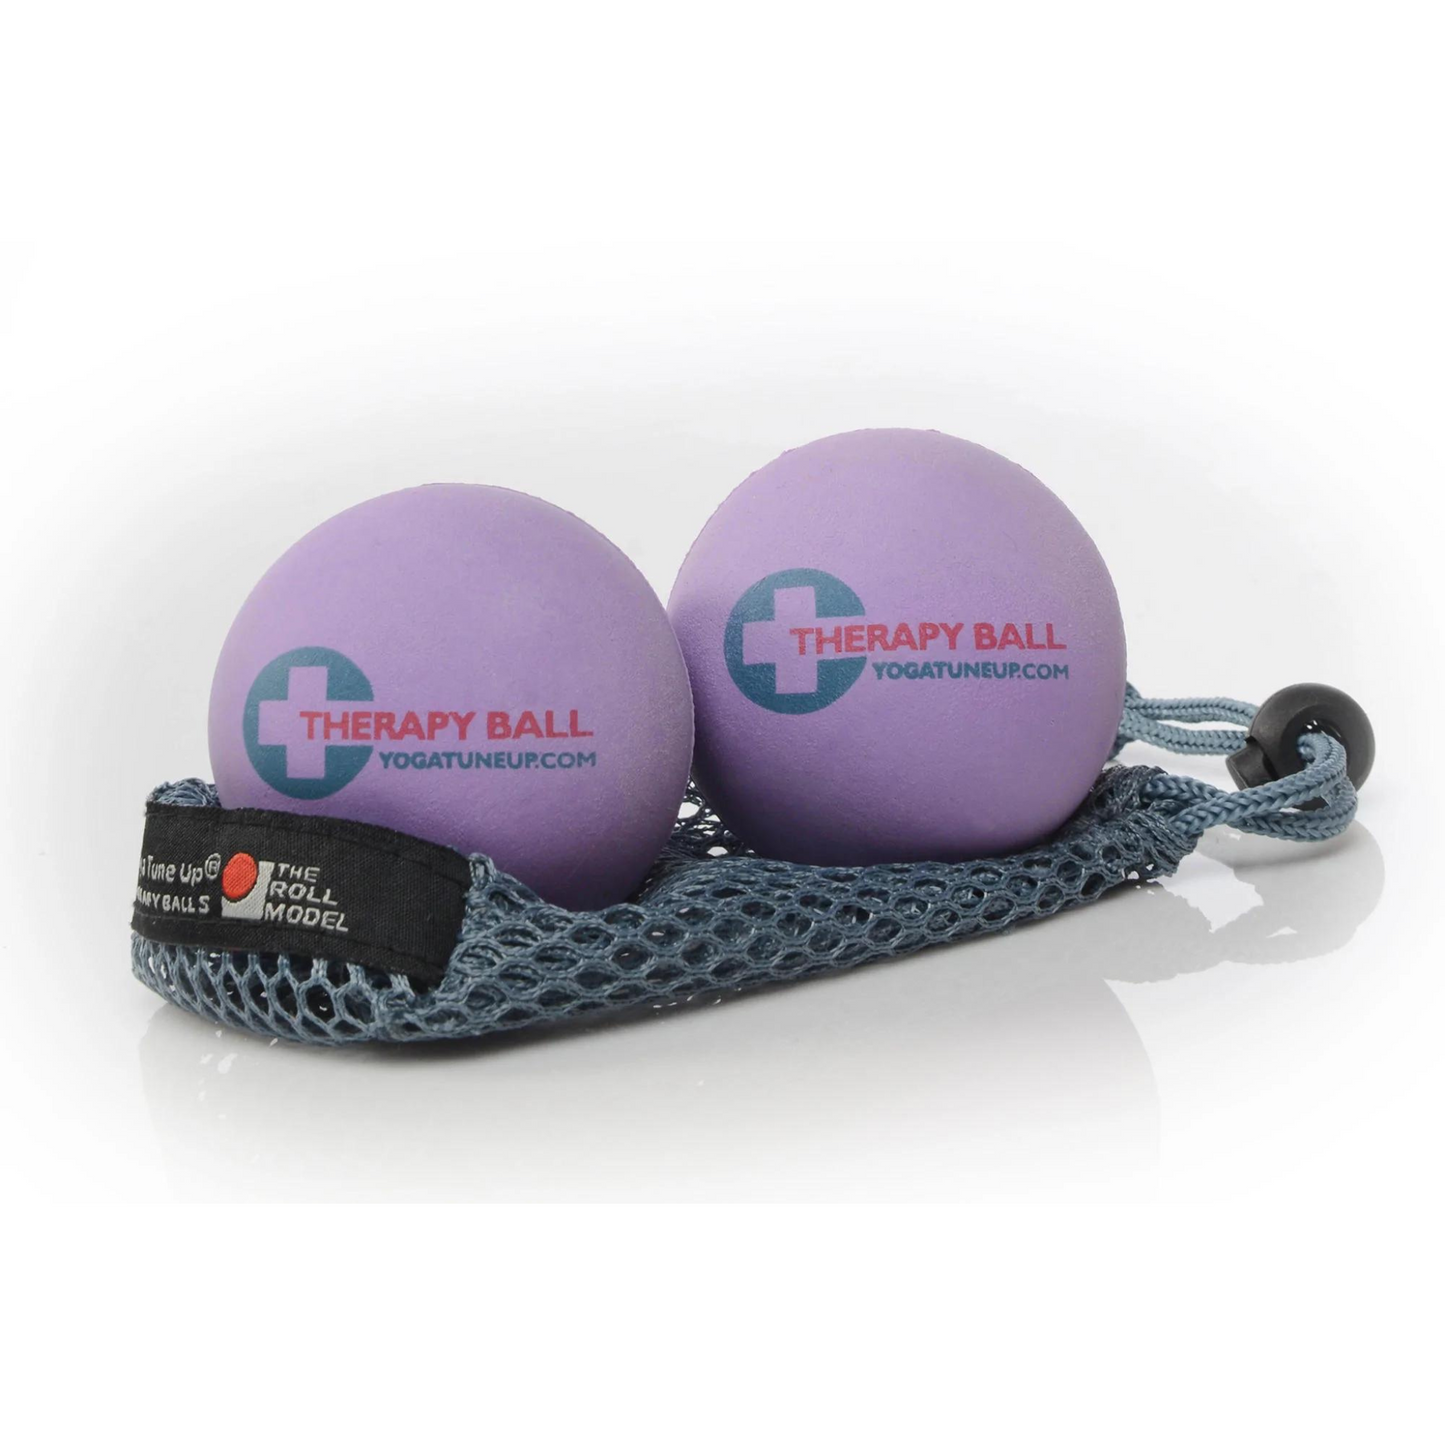 two light purple therapy balls that read "Therapy Ball yogatuneup.com" sitting on top of a grey mesh carrying bag